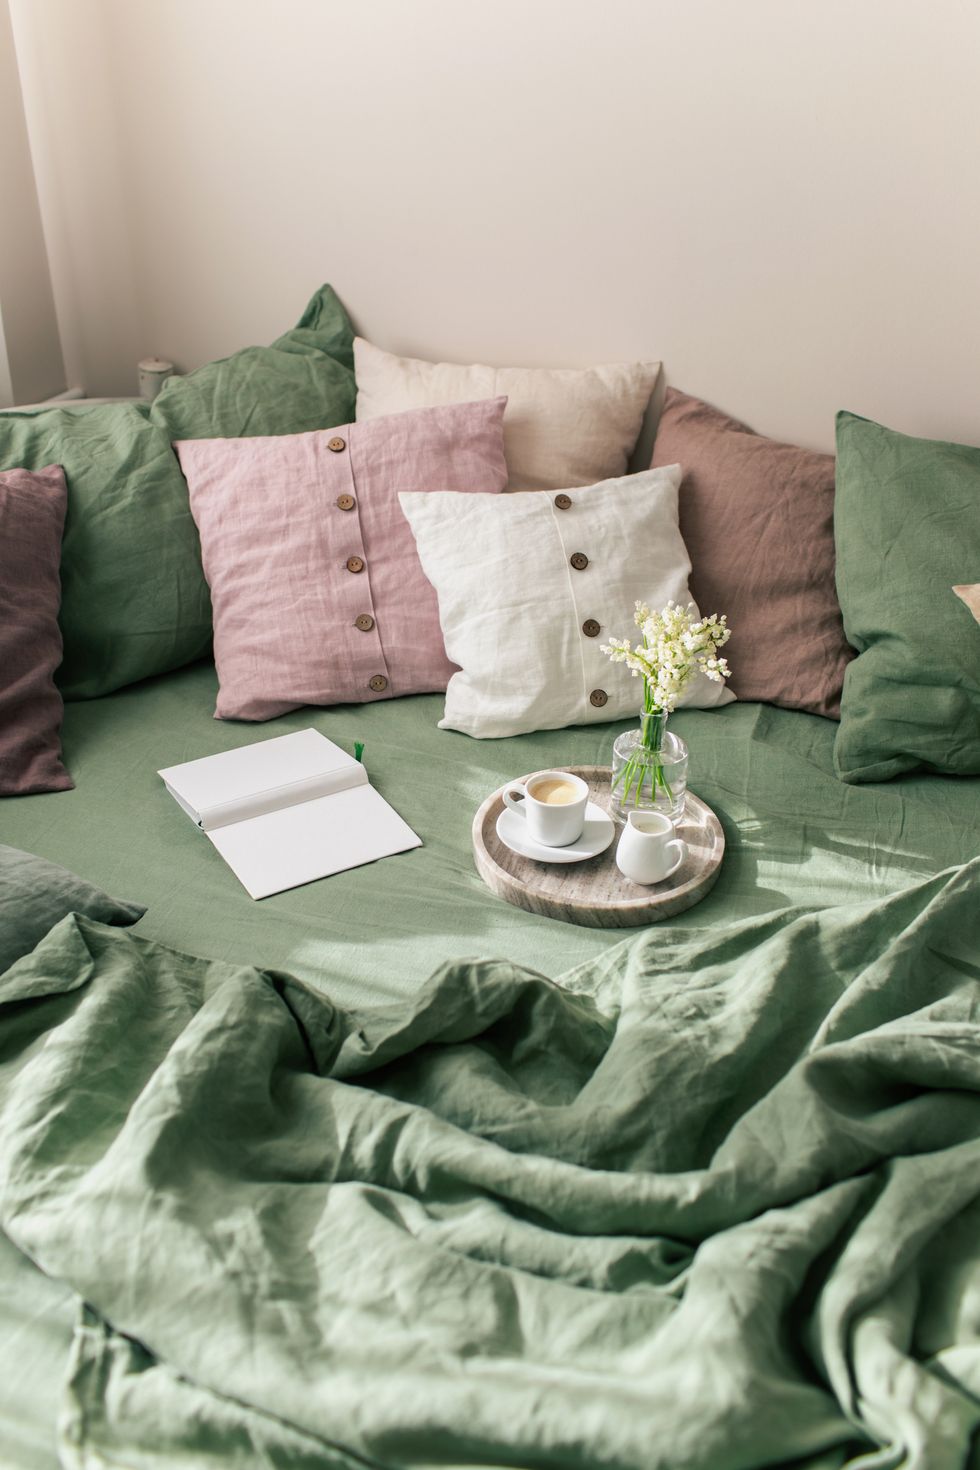 https://hips.hearstapps.com/hmg-prod/images/bedroom-interior-with-bright-green-linen-and-pink-royalty-free-image-1588698472.jpg?crop=1xw:1xh;center,top&resize=980:*